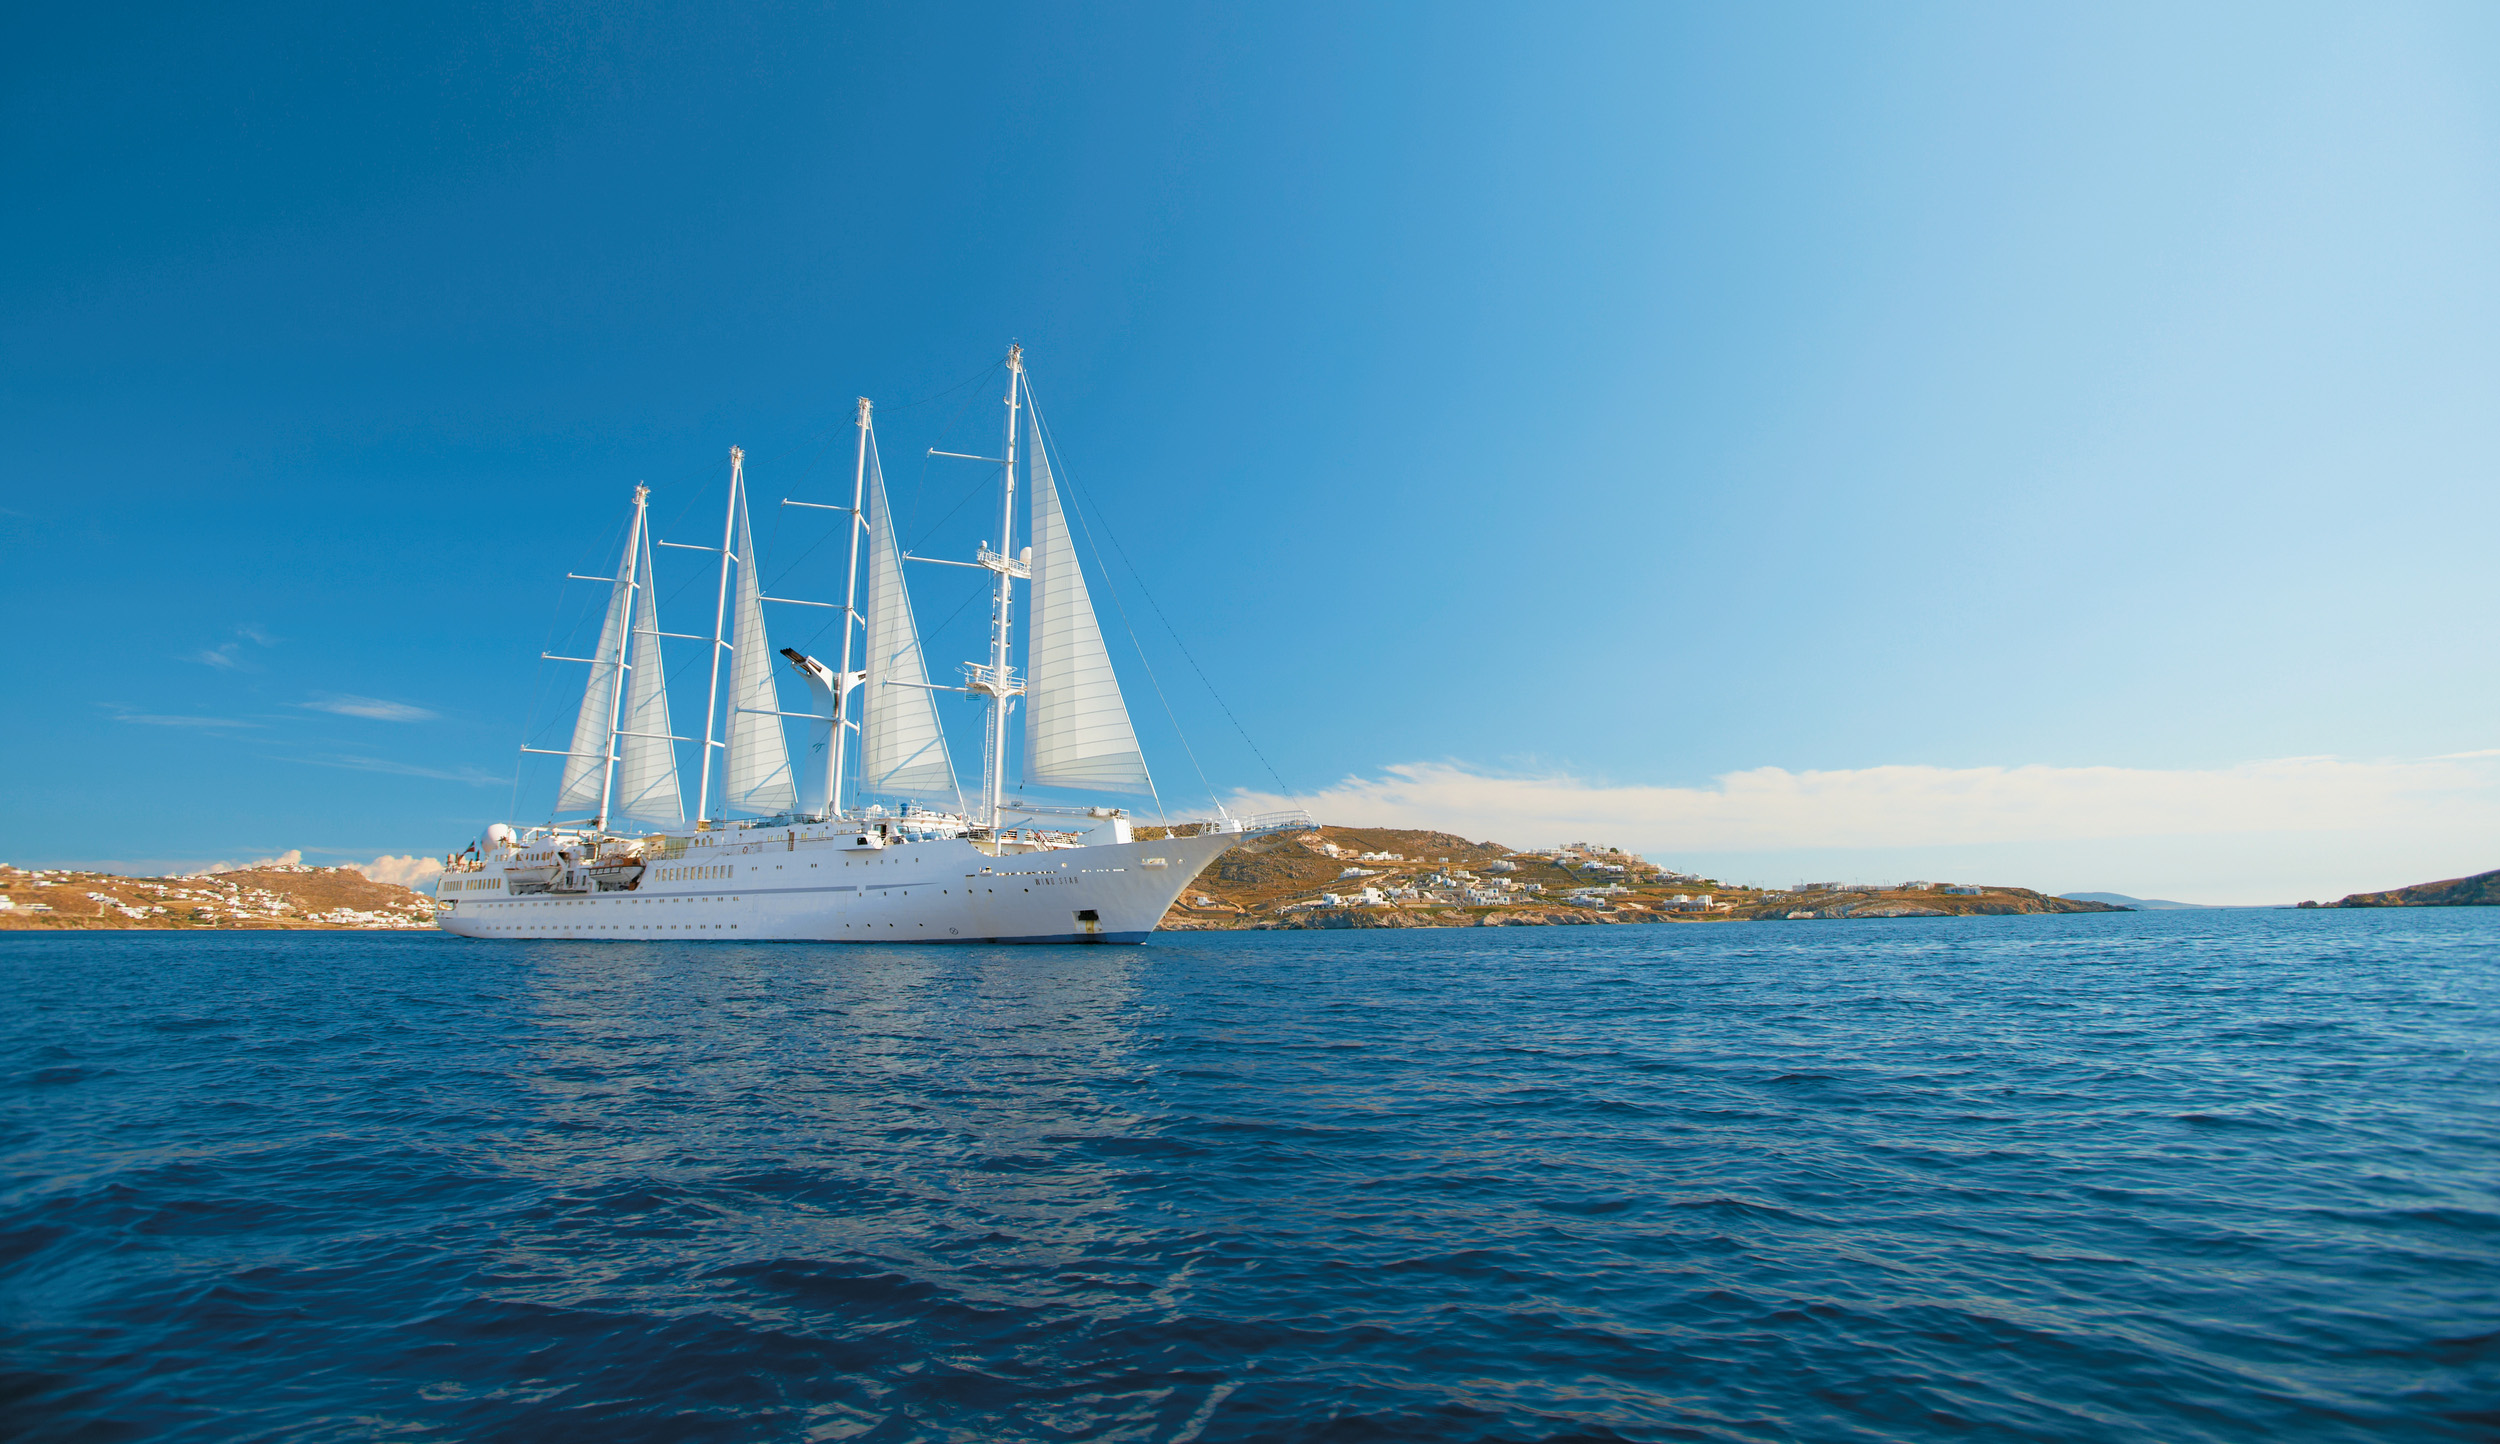 Greece is the Word Windstar Cruises “Wind Star” Sets Sail for